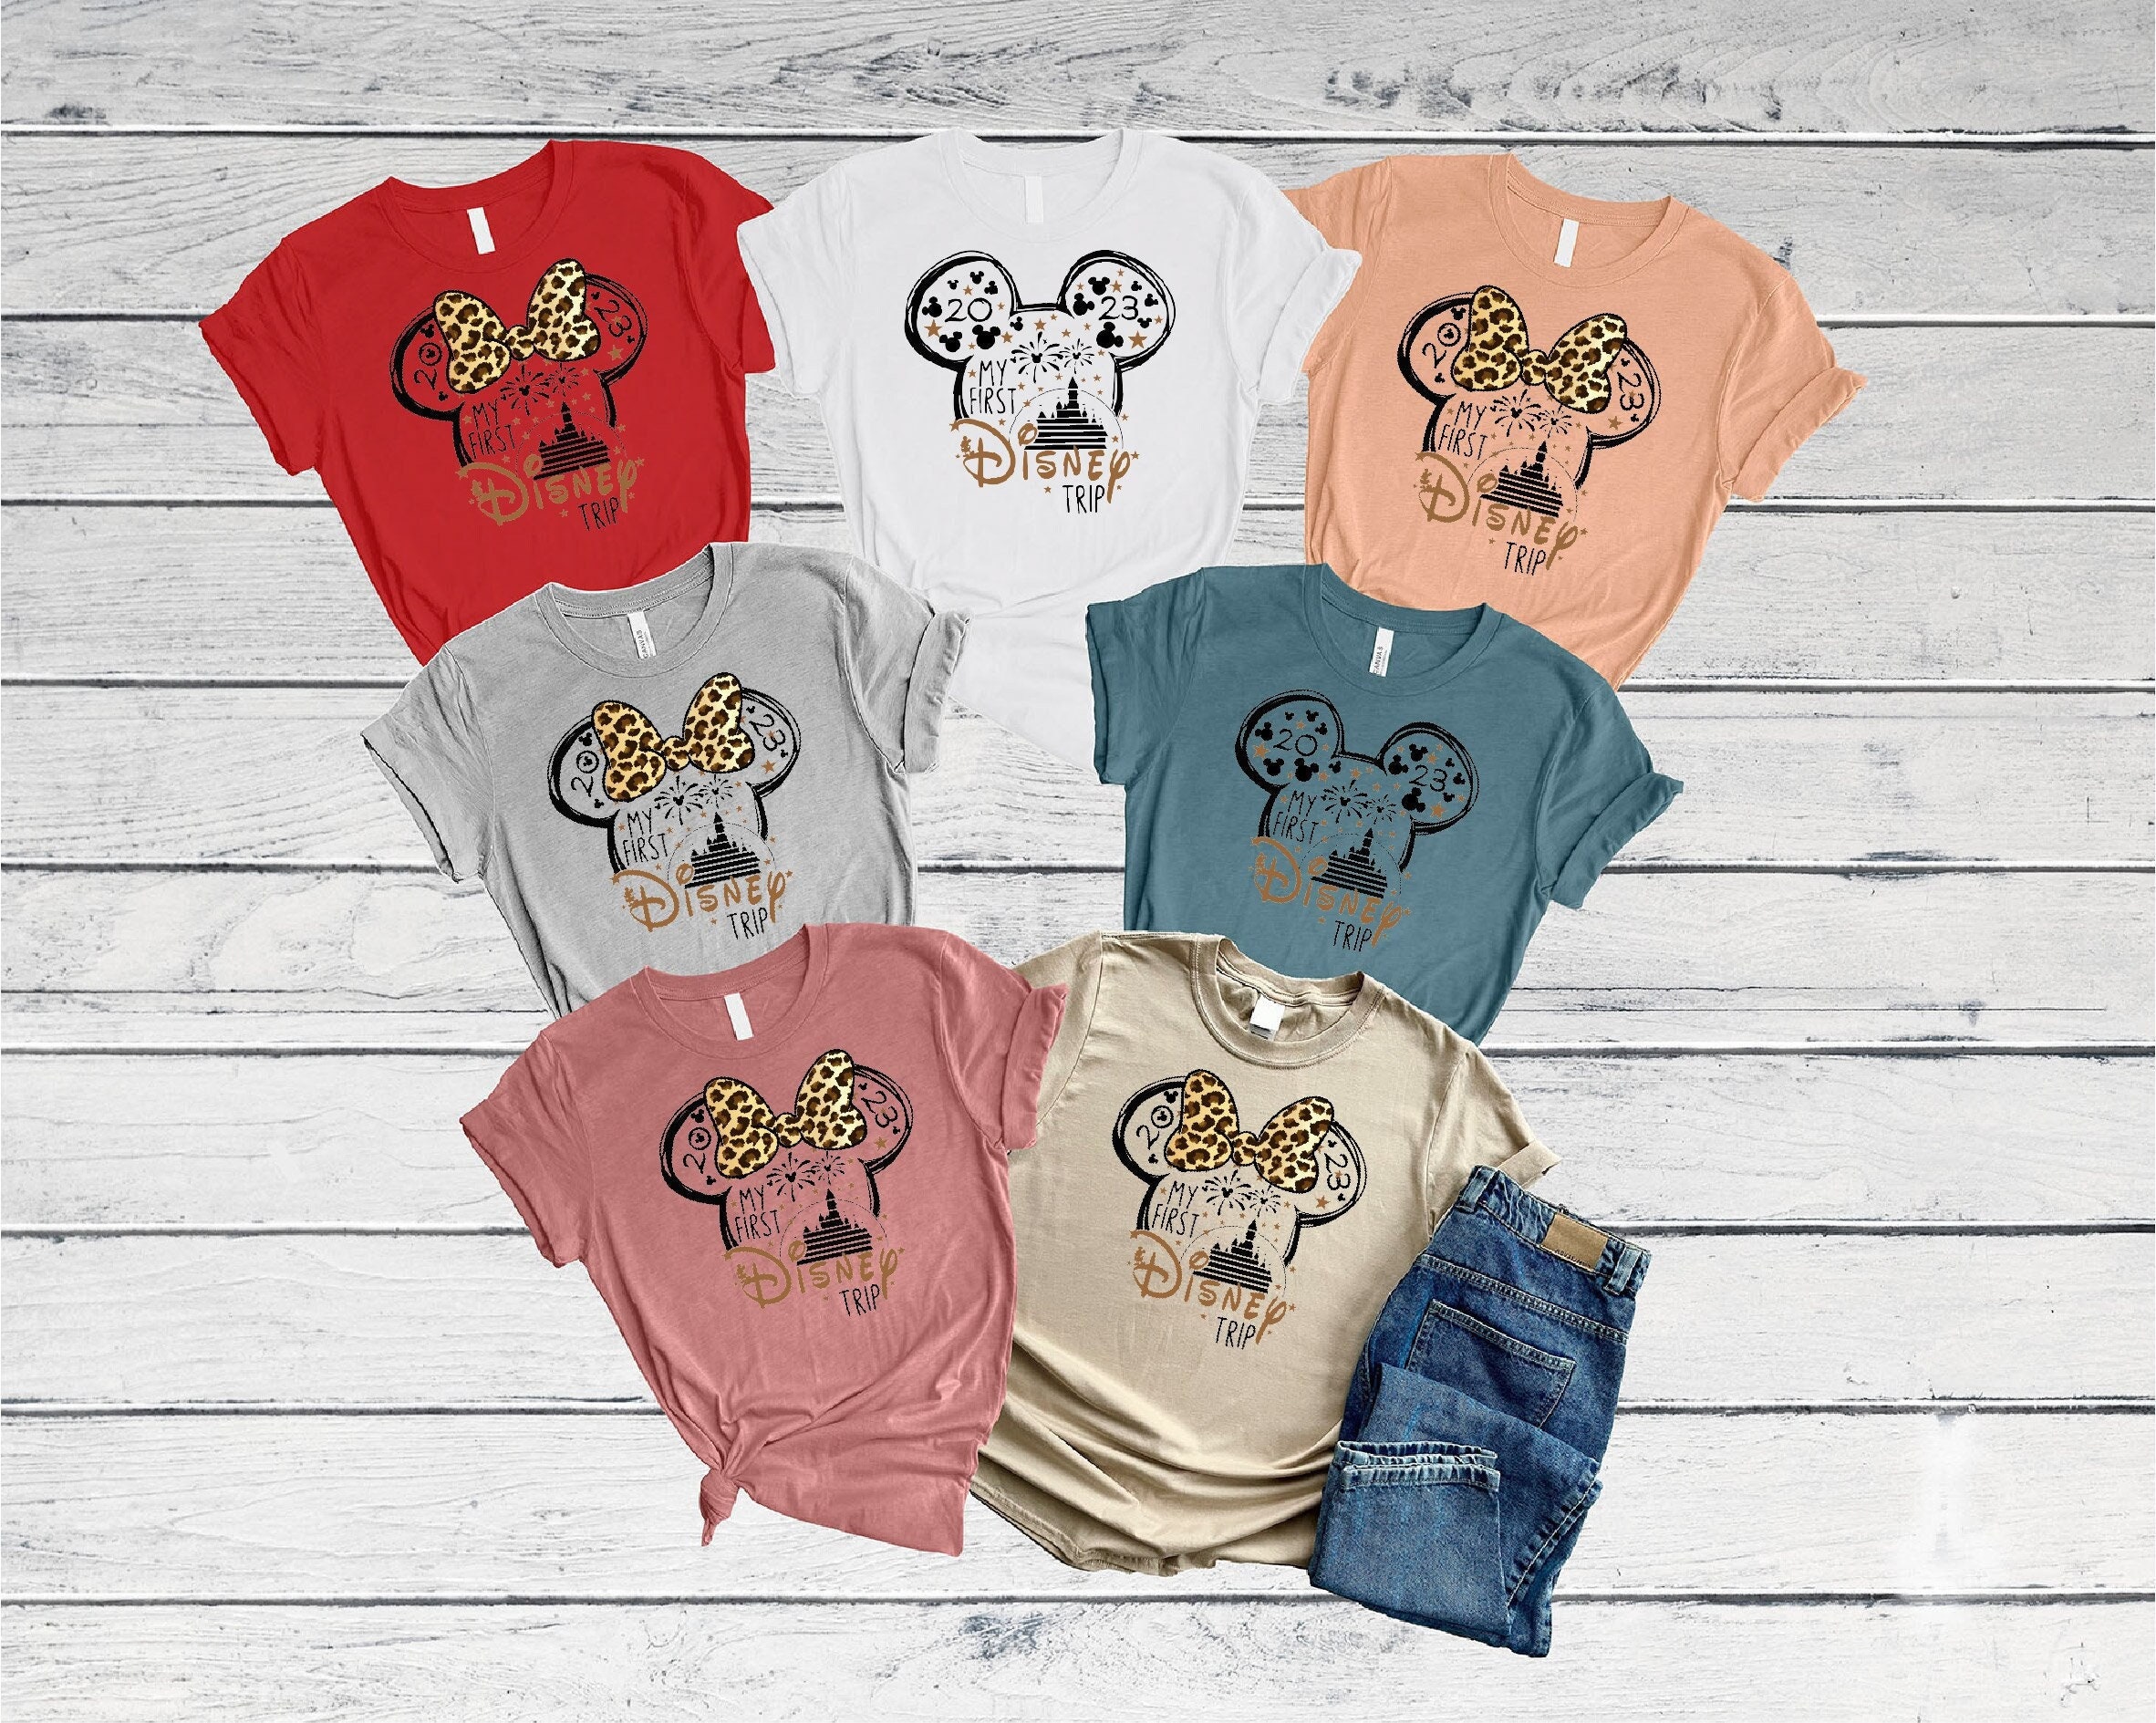 Discover 2023 My First Disney Trip Shirt, Mickey Mouse Shirt, Ready To Press DTF Print, Disney Family Shirt, Minnie Mouse Shirt, Disney Trip Shirt